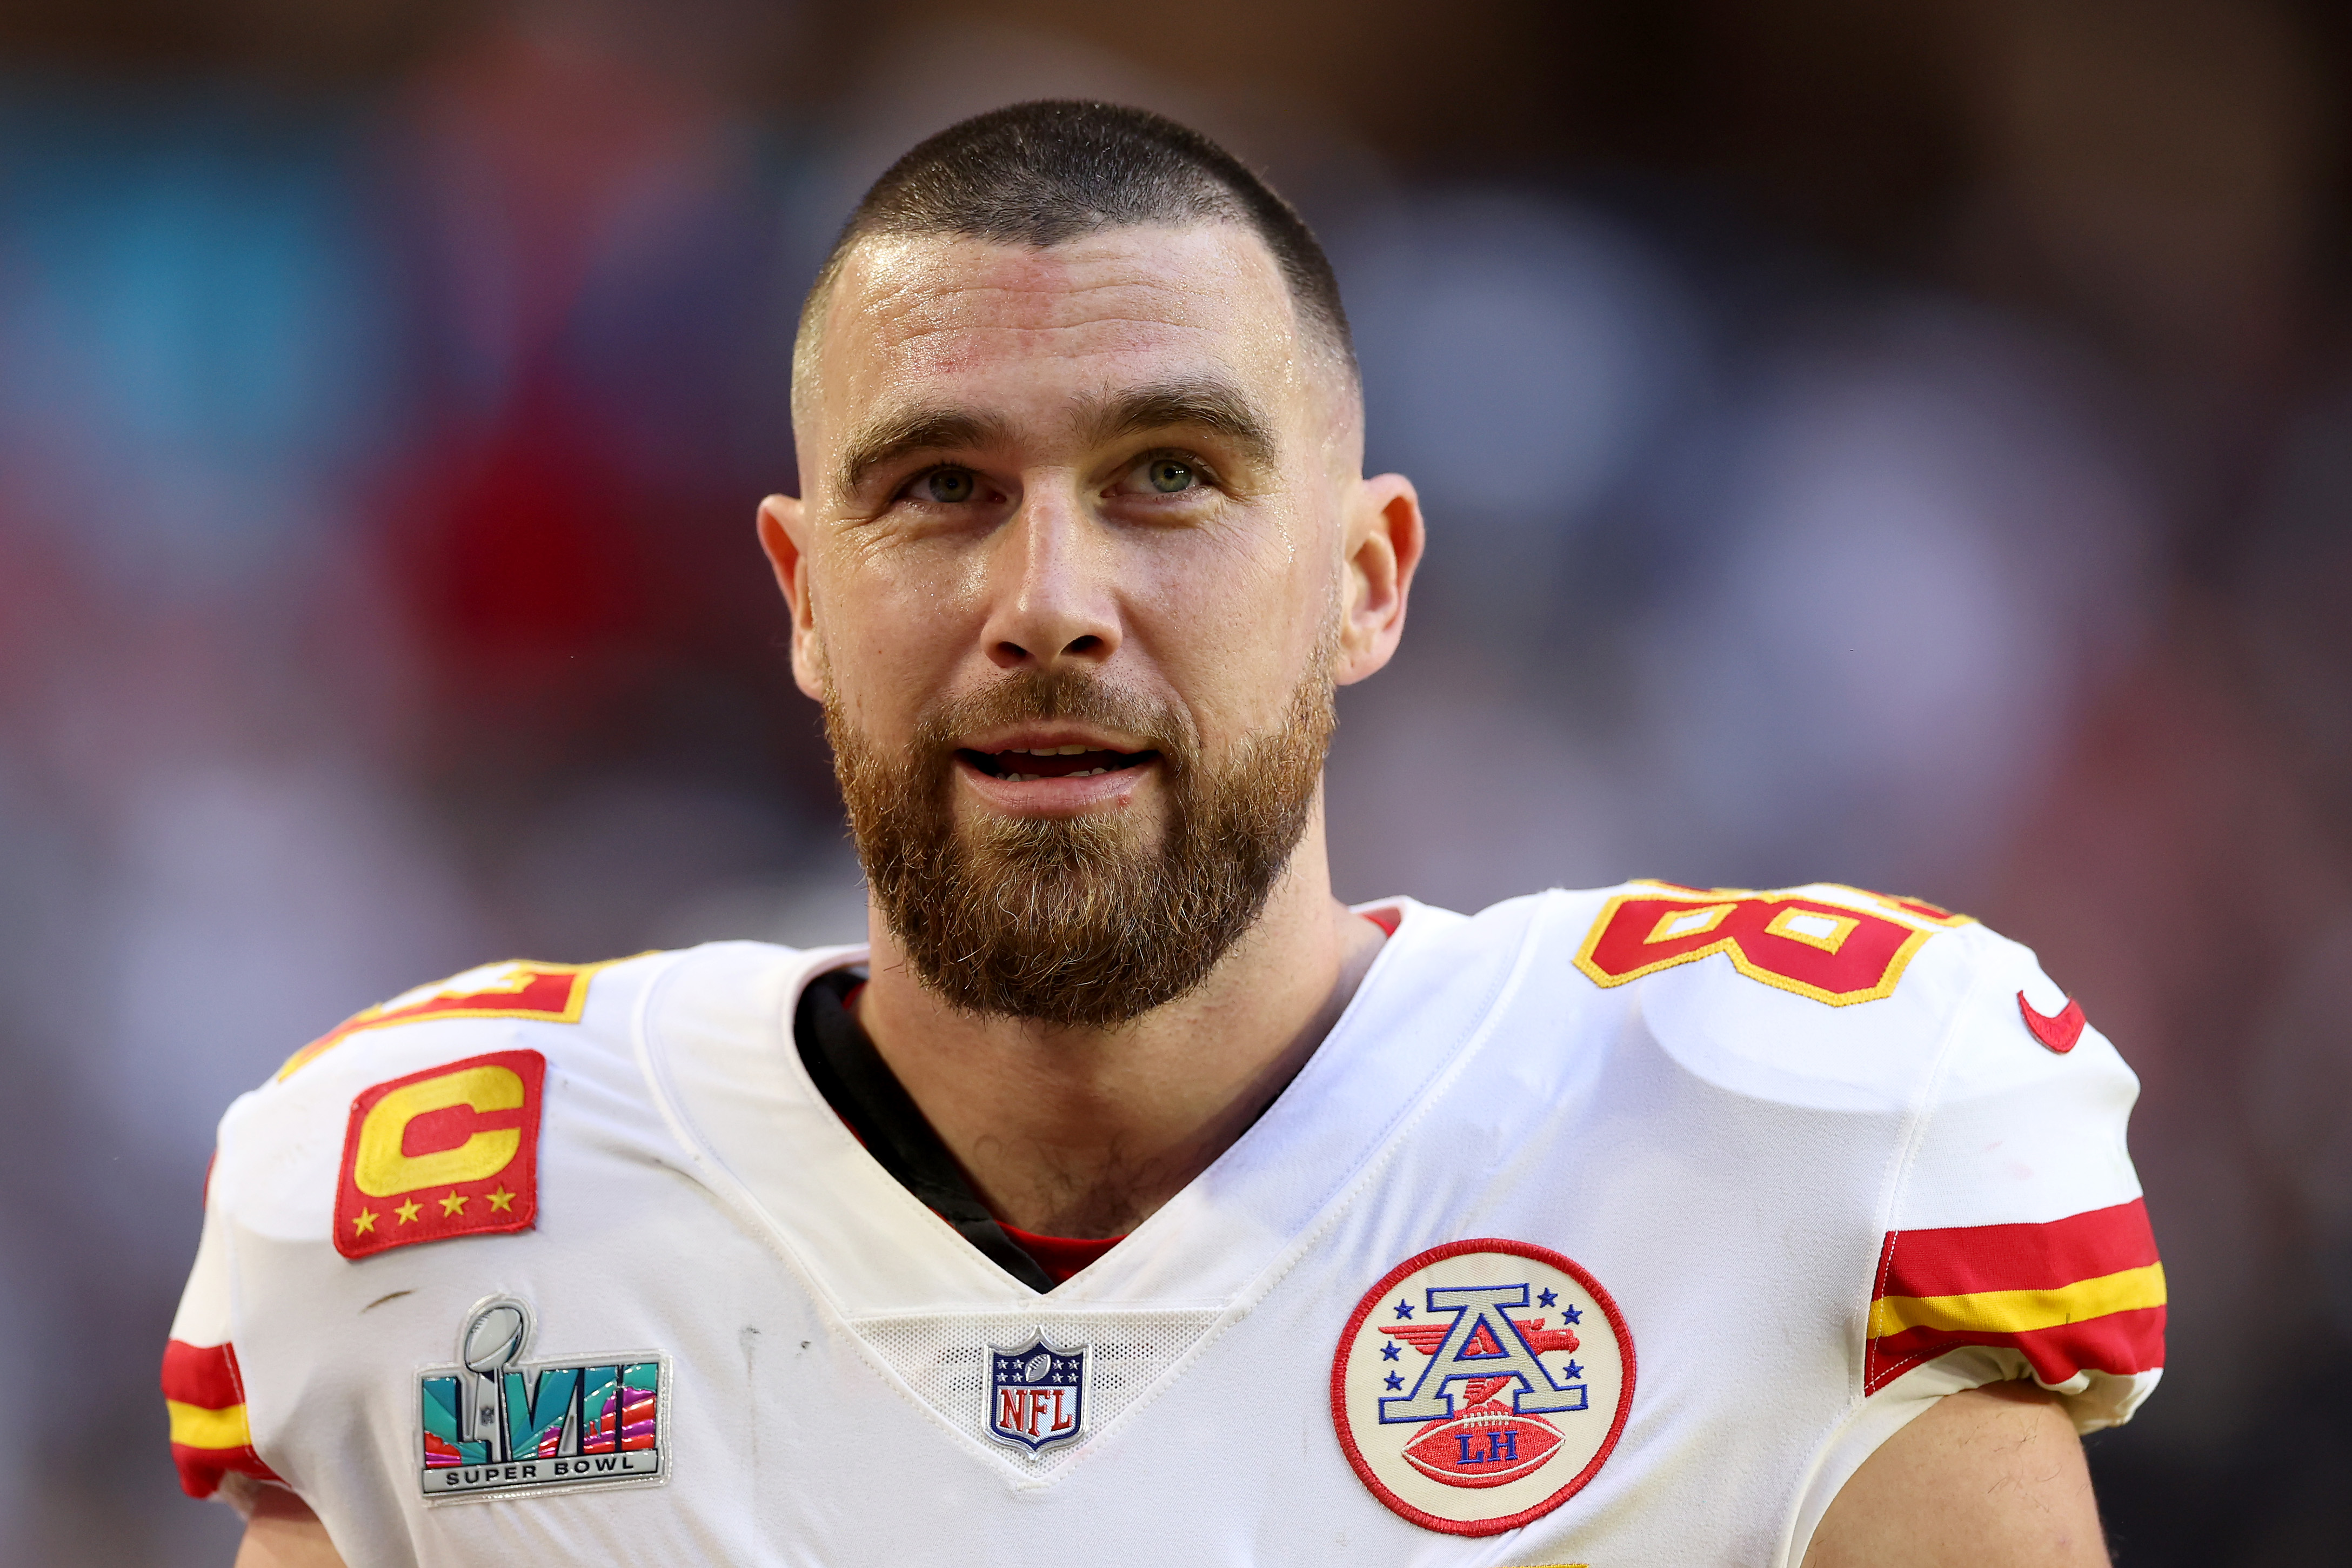 Travis Kelce #87 of the Kansas City Chiefs looks on against the Philadelphia Eagles during the first quarter in Super Bowl LVII at State Farm Stadium on February 12, 2023 in Glendale, Arizona.